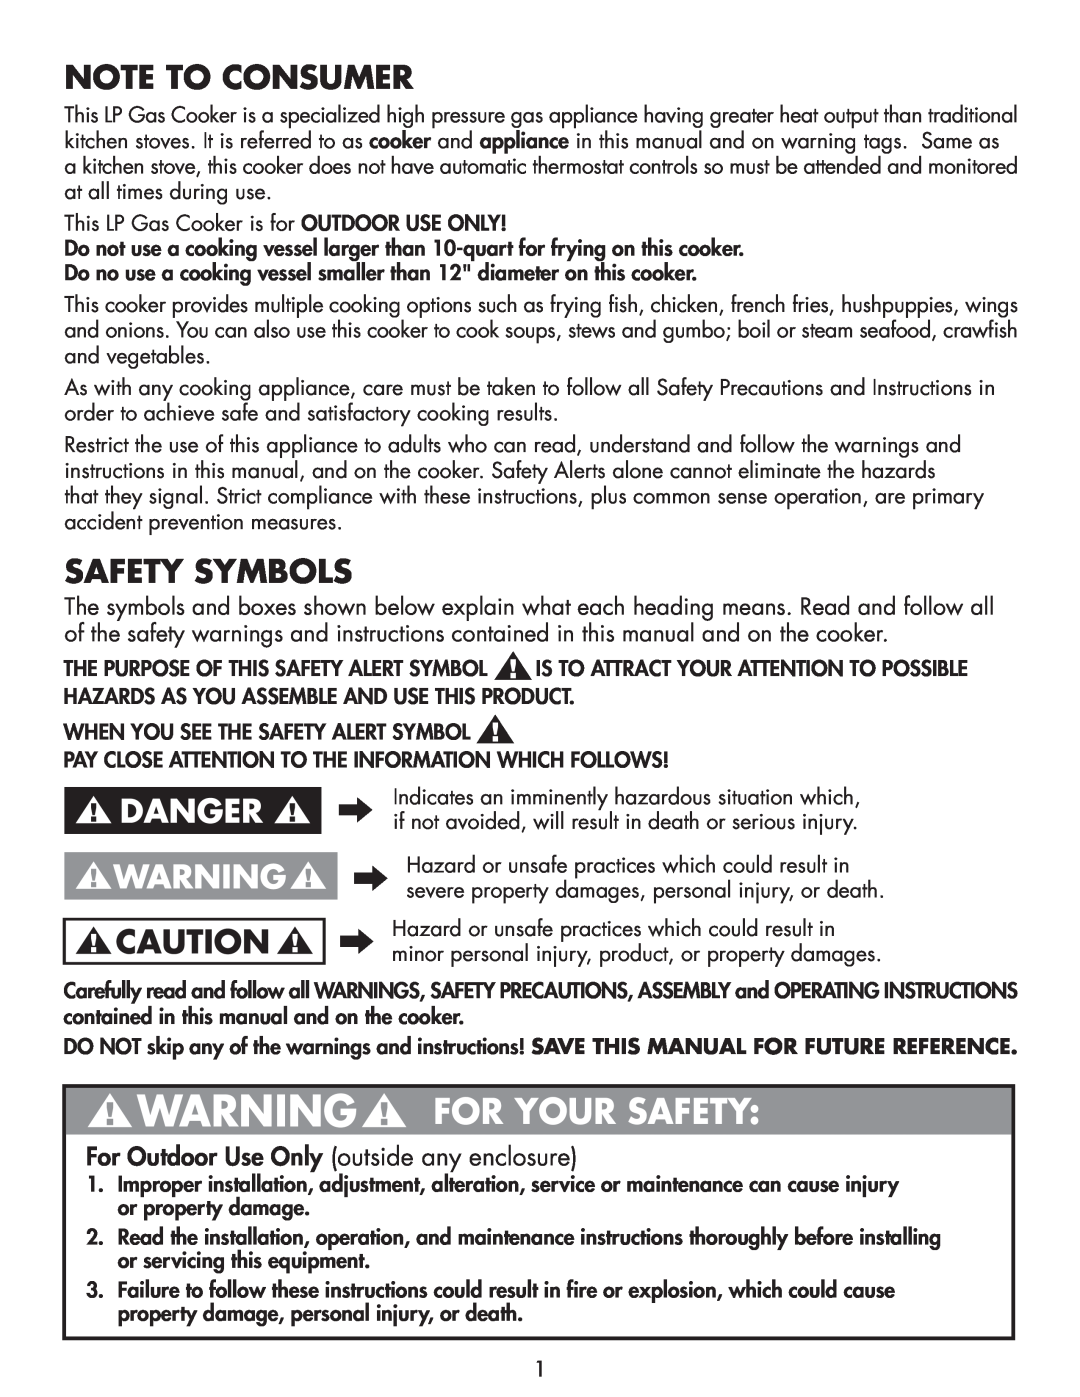 Bayou Classic 2212 Note To Consumer, Safety Symbols, For Outdoor Use Only outside any enclosure, Warning For Your Safety 